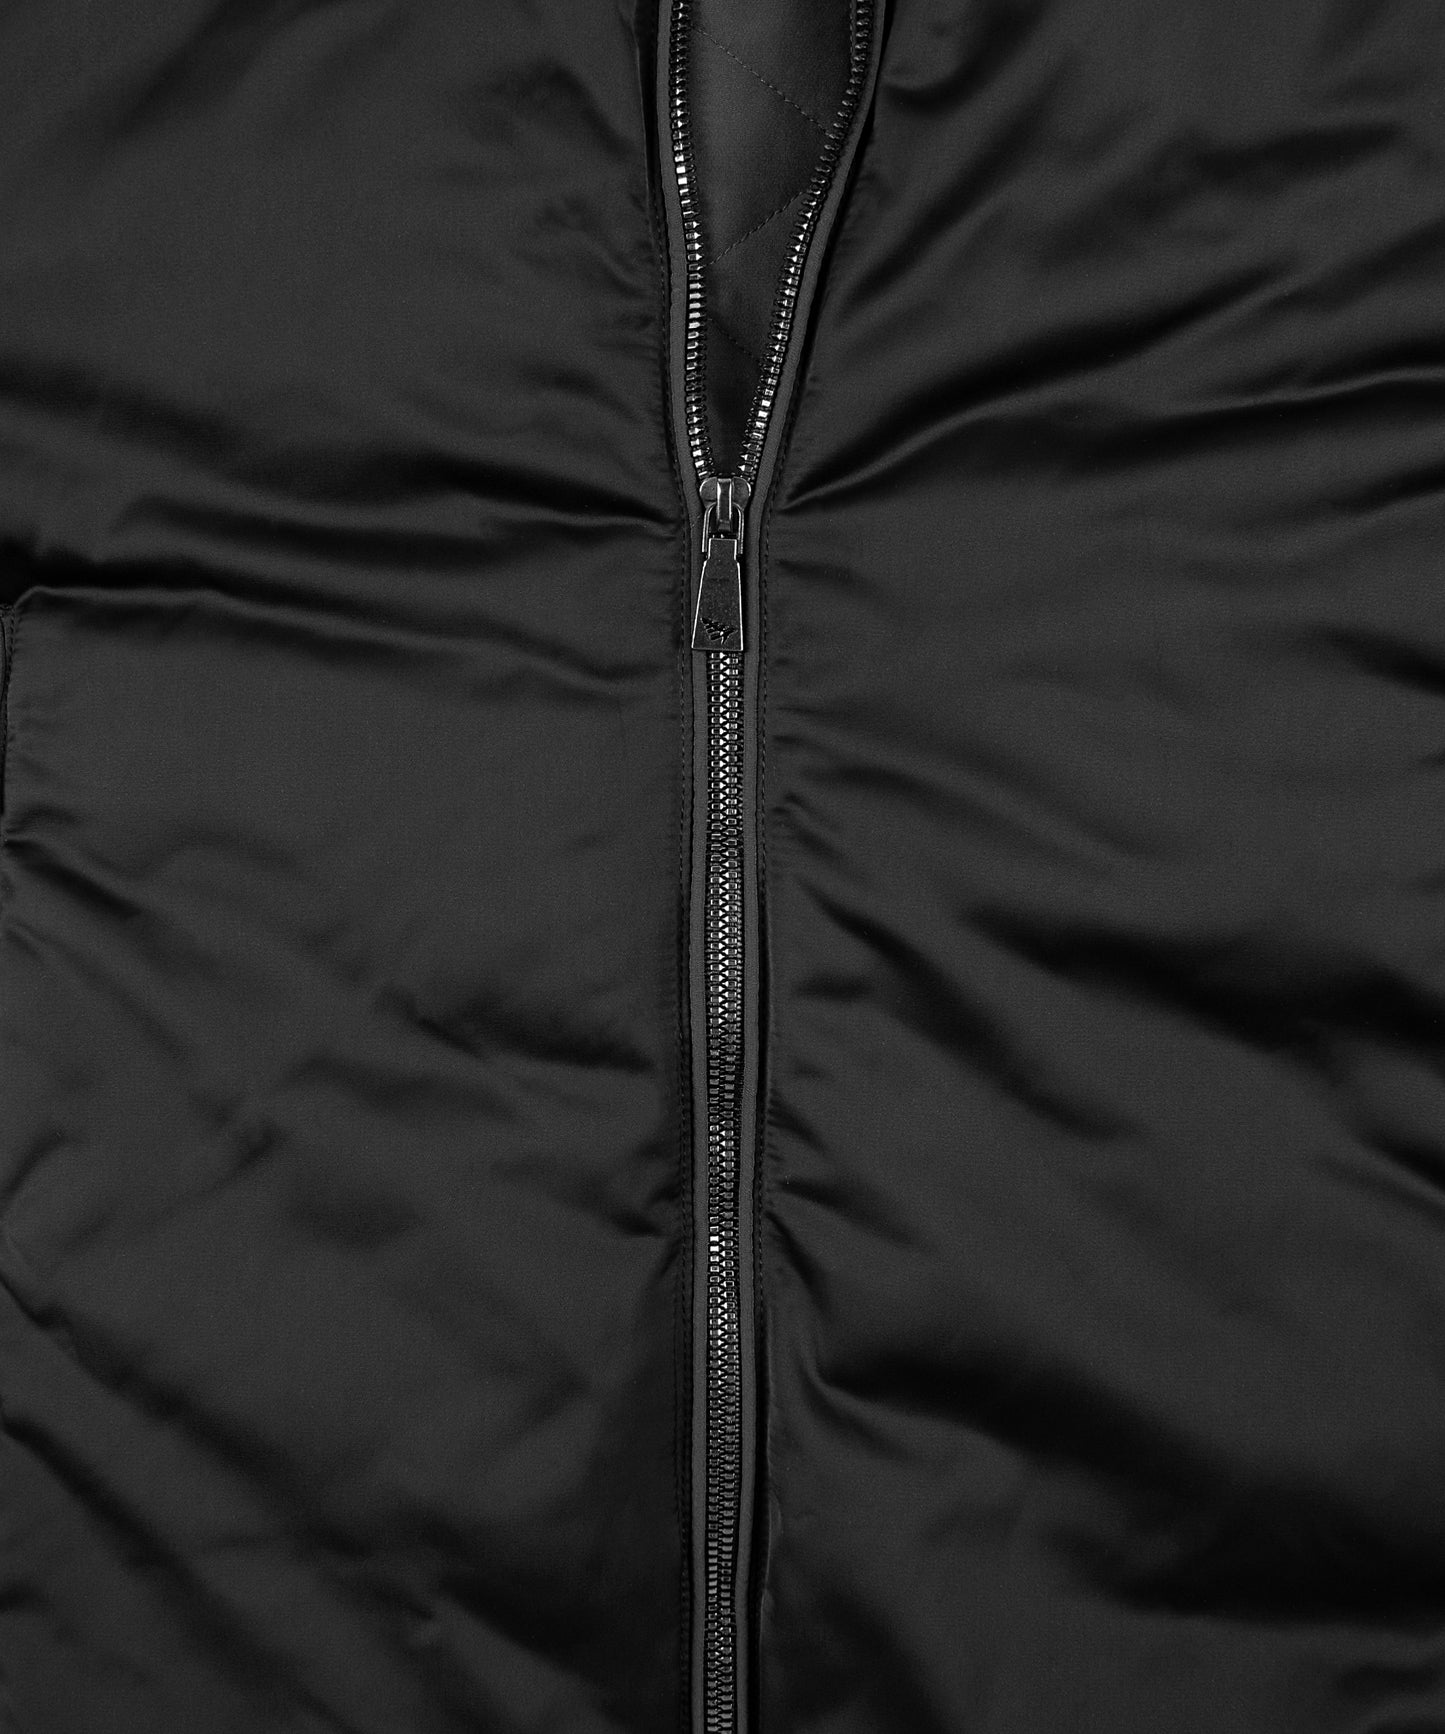 CUSTOM_ALT_TEXT: Mirror-like front zipper closure with Plane knockout logo pull on Paper Planes Puffer Jacket, color Black.